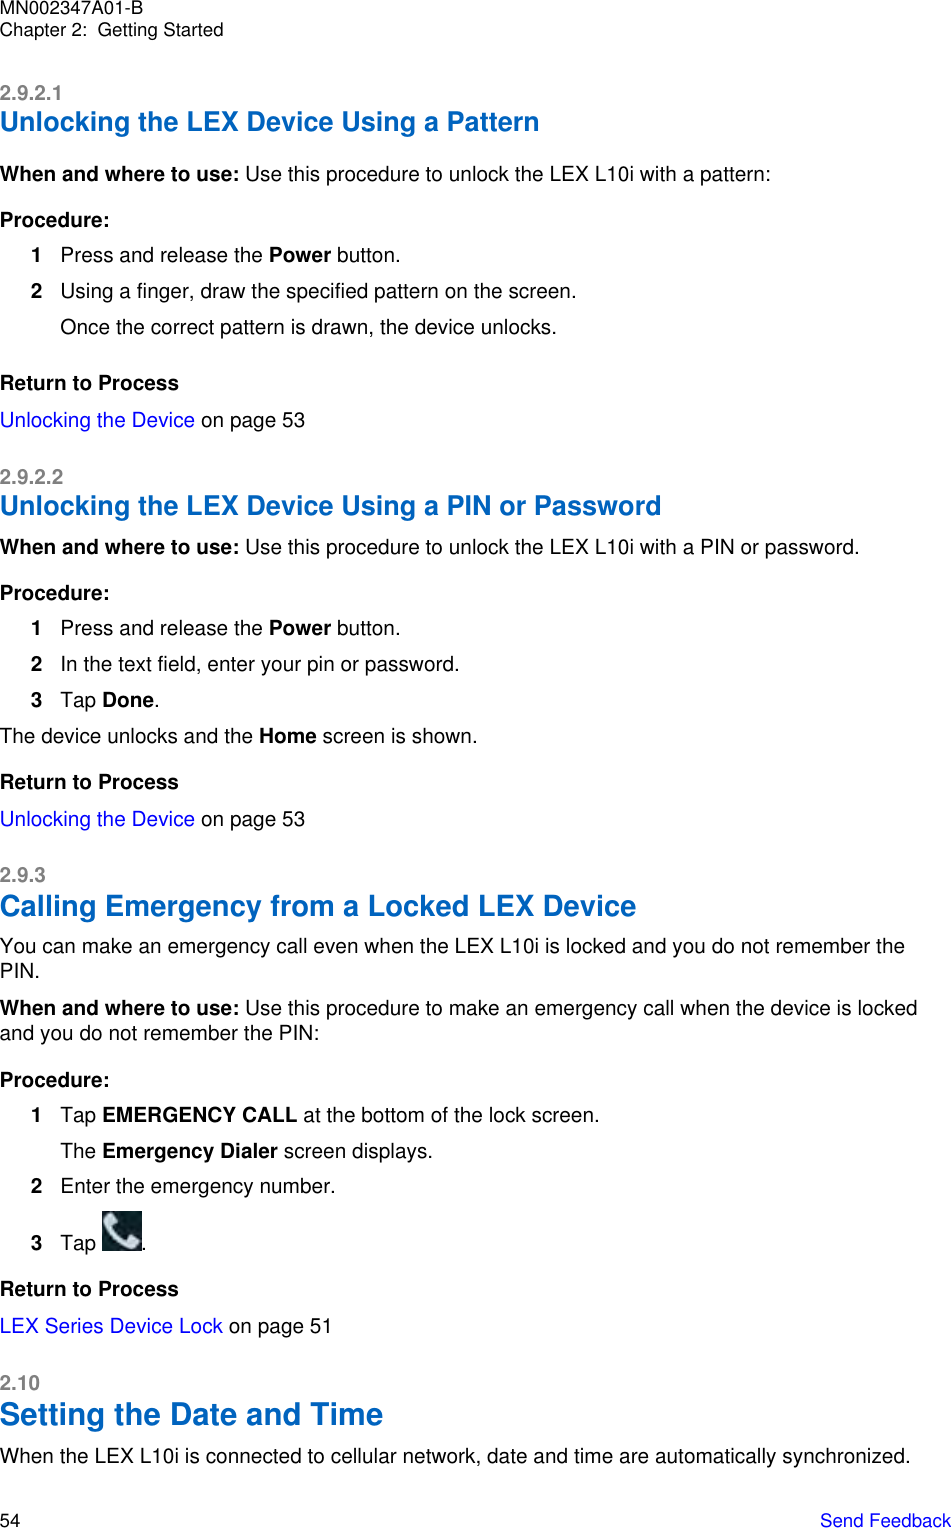 2.9.2.1Unlocking the LEX Device Using a PatternWhen and where to use: Use this procedure to unlock the LEX L10i with a pattern:Procedure:1Press and release the Power button.2Using a finger, draw the specified pattern on the screen.Once the correct pattern is drawn, the device unlocks.Return to ProcessUnlocking the Device on page 532.9.2.2Unlocking the LEX Device Using a PIN or PasswordWhen and where to use: Use this procedure to unlock the LEX L10i with a PIN or password.Procedure:1Press and release the Power button.2In the text field, enter your pin or password.3Tap Done.The device unlocks and the Home screen is shown.Return to ProcessUnlocking the Device on page 532.9.3Calling Emergency from a Locked LEX DeviceYou can make an emergency call even when the LEX L10i is locked and you do not remember thePIN.When and where to use: Use this procedure to make an emergency call when the device is lockedand you do not remember the PIN:Procedure:1Tap EMERGENCY CALL at the bottom of the lock screen.The Emergency Dialer screen displays.2Enter the emergency number.3Tap  .Return to ProcessLEX Series Device Lock on page 512.10Setting the Date and TimeWhen the LEX L10i is connected to cellular network, date and time are automatically synchronized.MN002347A01-BChapter 2:  Getting Started54   Send Feedback